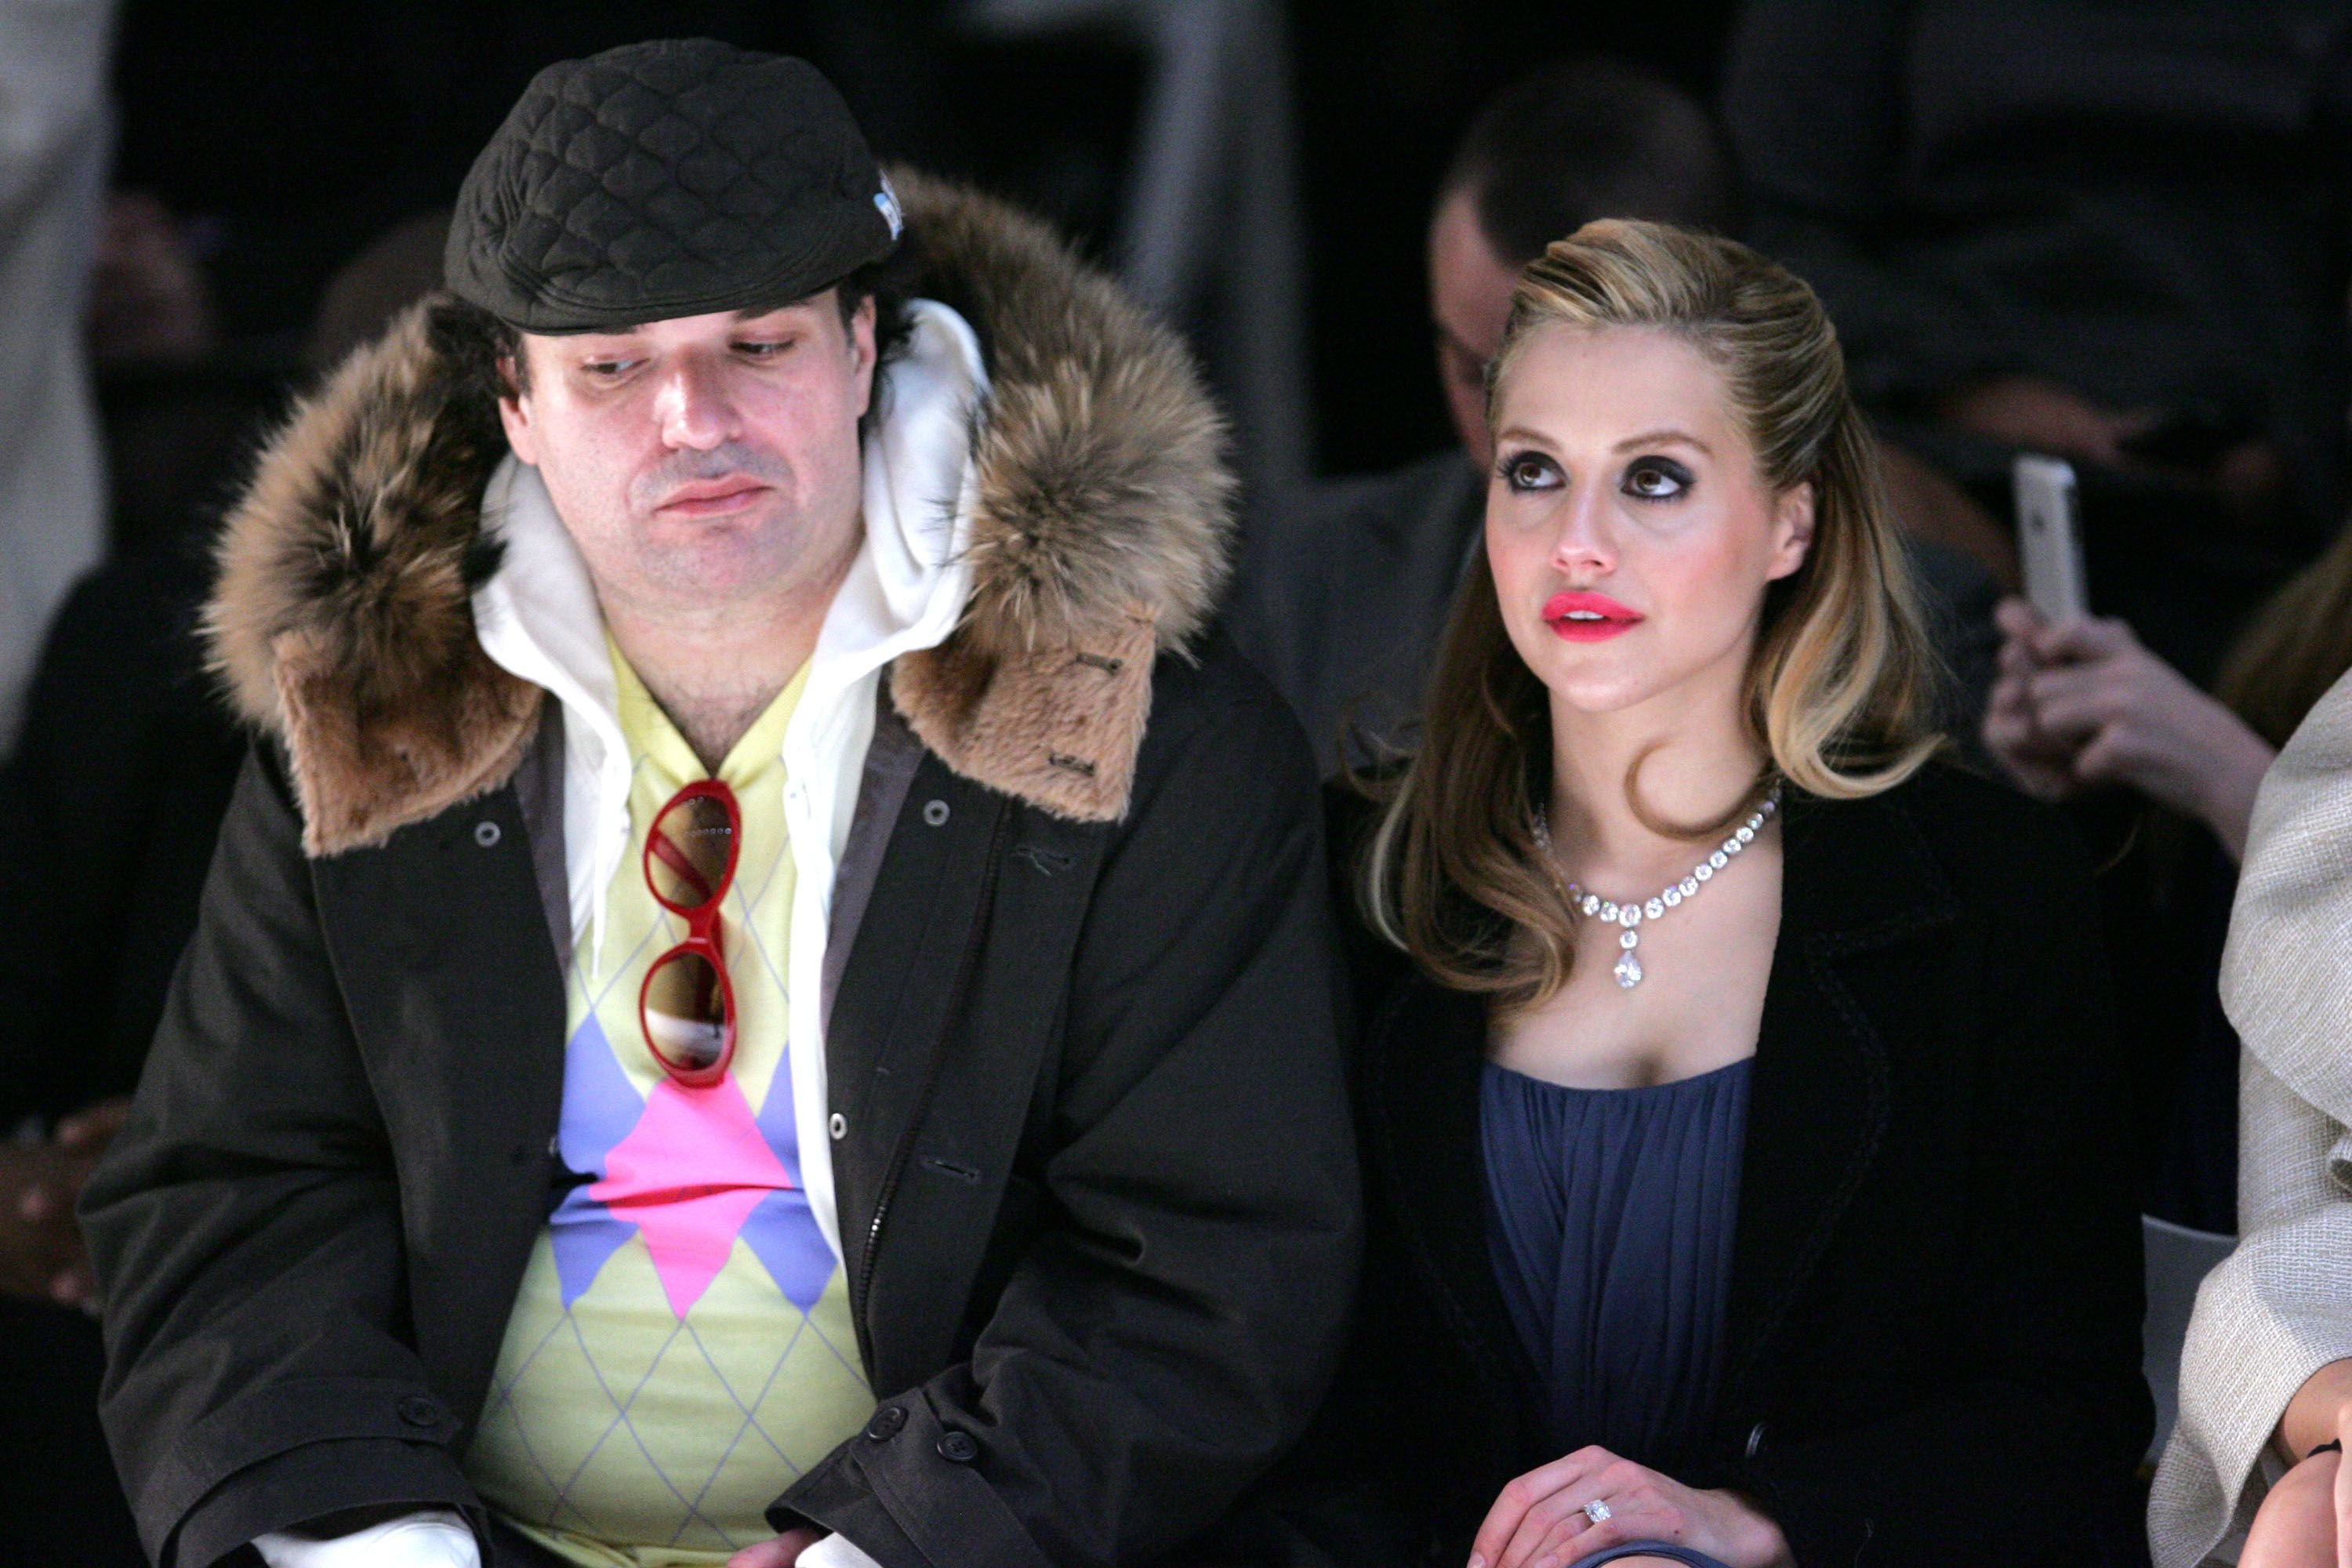 Actress Brittany Murphy and husband Simon Monjack at the Monique Lhuillier Fall 2008 fashion show during Mercedes-Benz Fashion Week Fall 2008 at The Promenade at Bryant Park in New York City | Source: Getty Images 